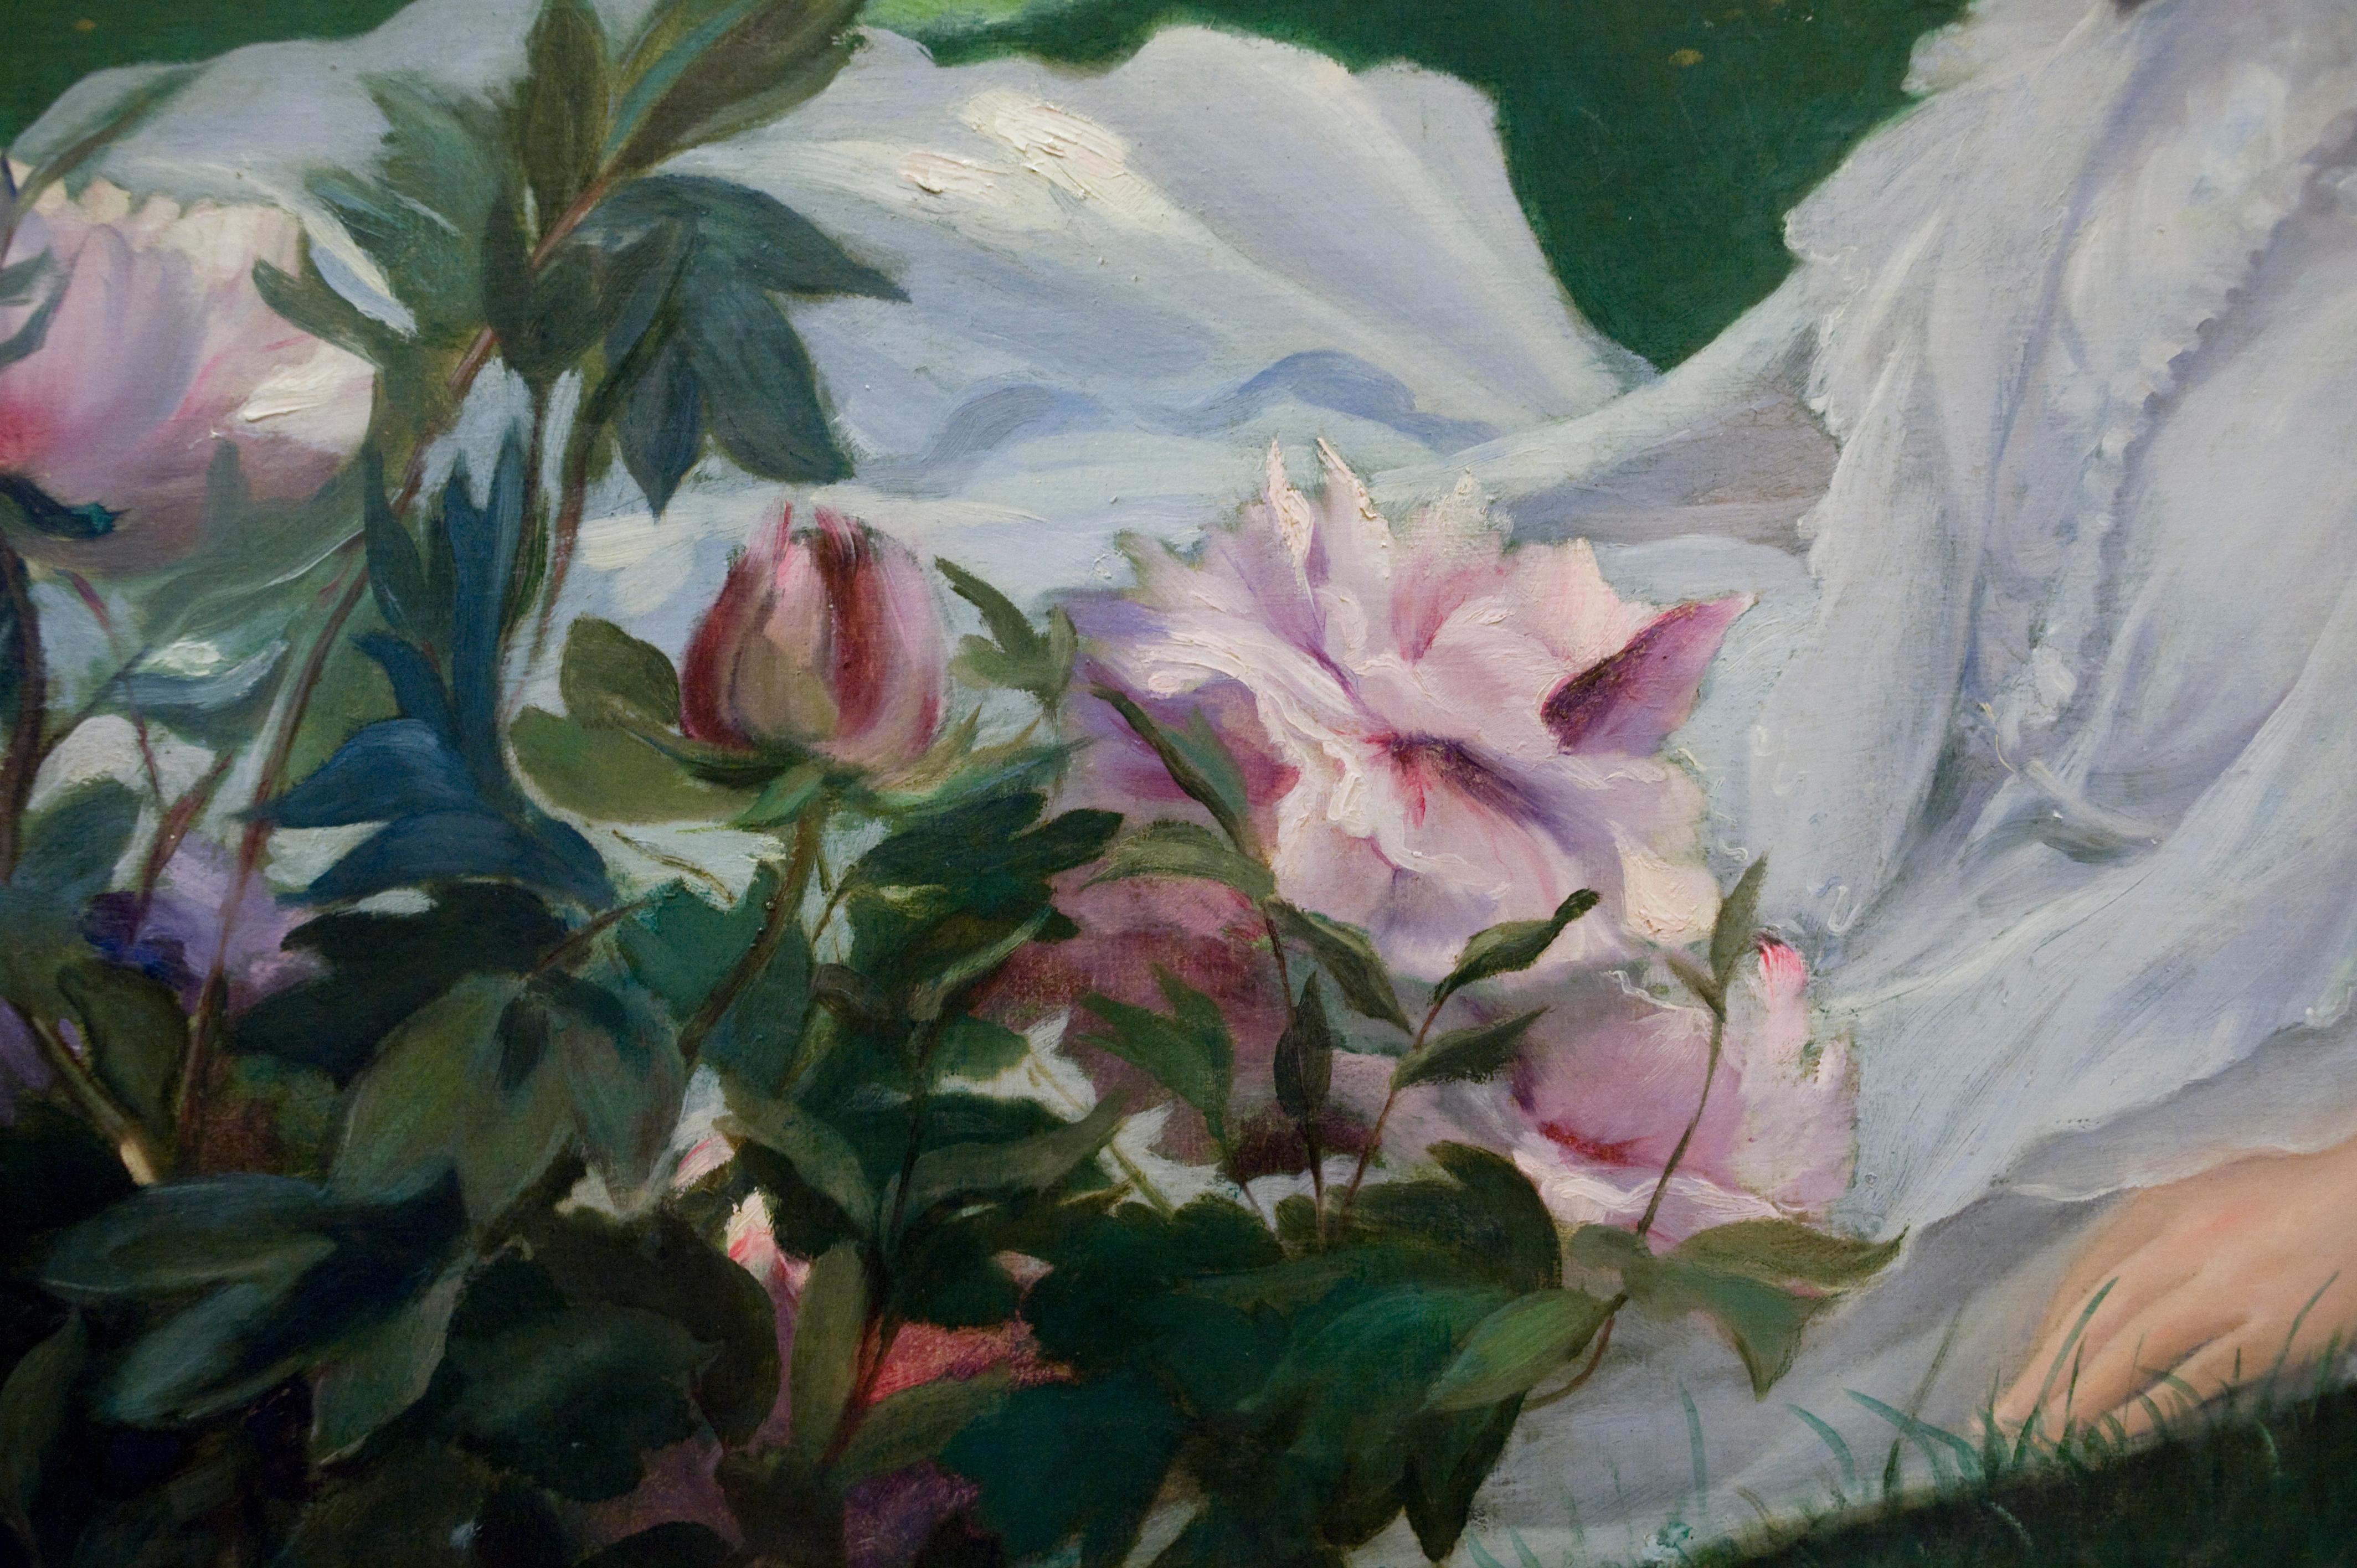 Henriette Chabot with Peonies  - Painting by Jacques Emile Blanche